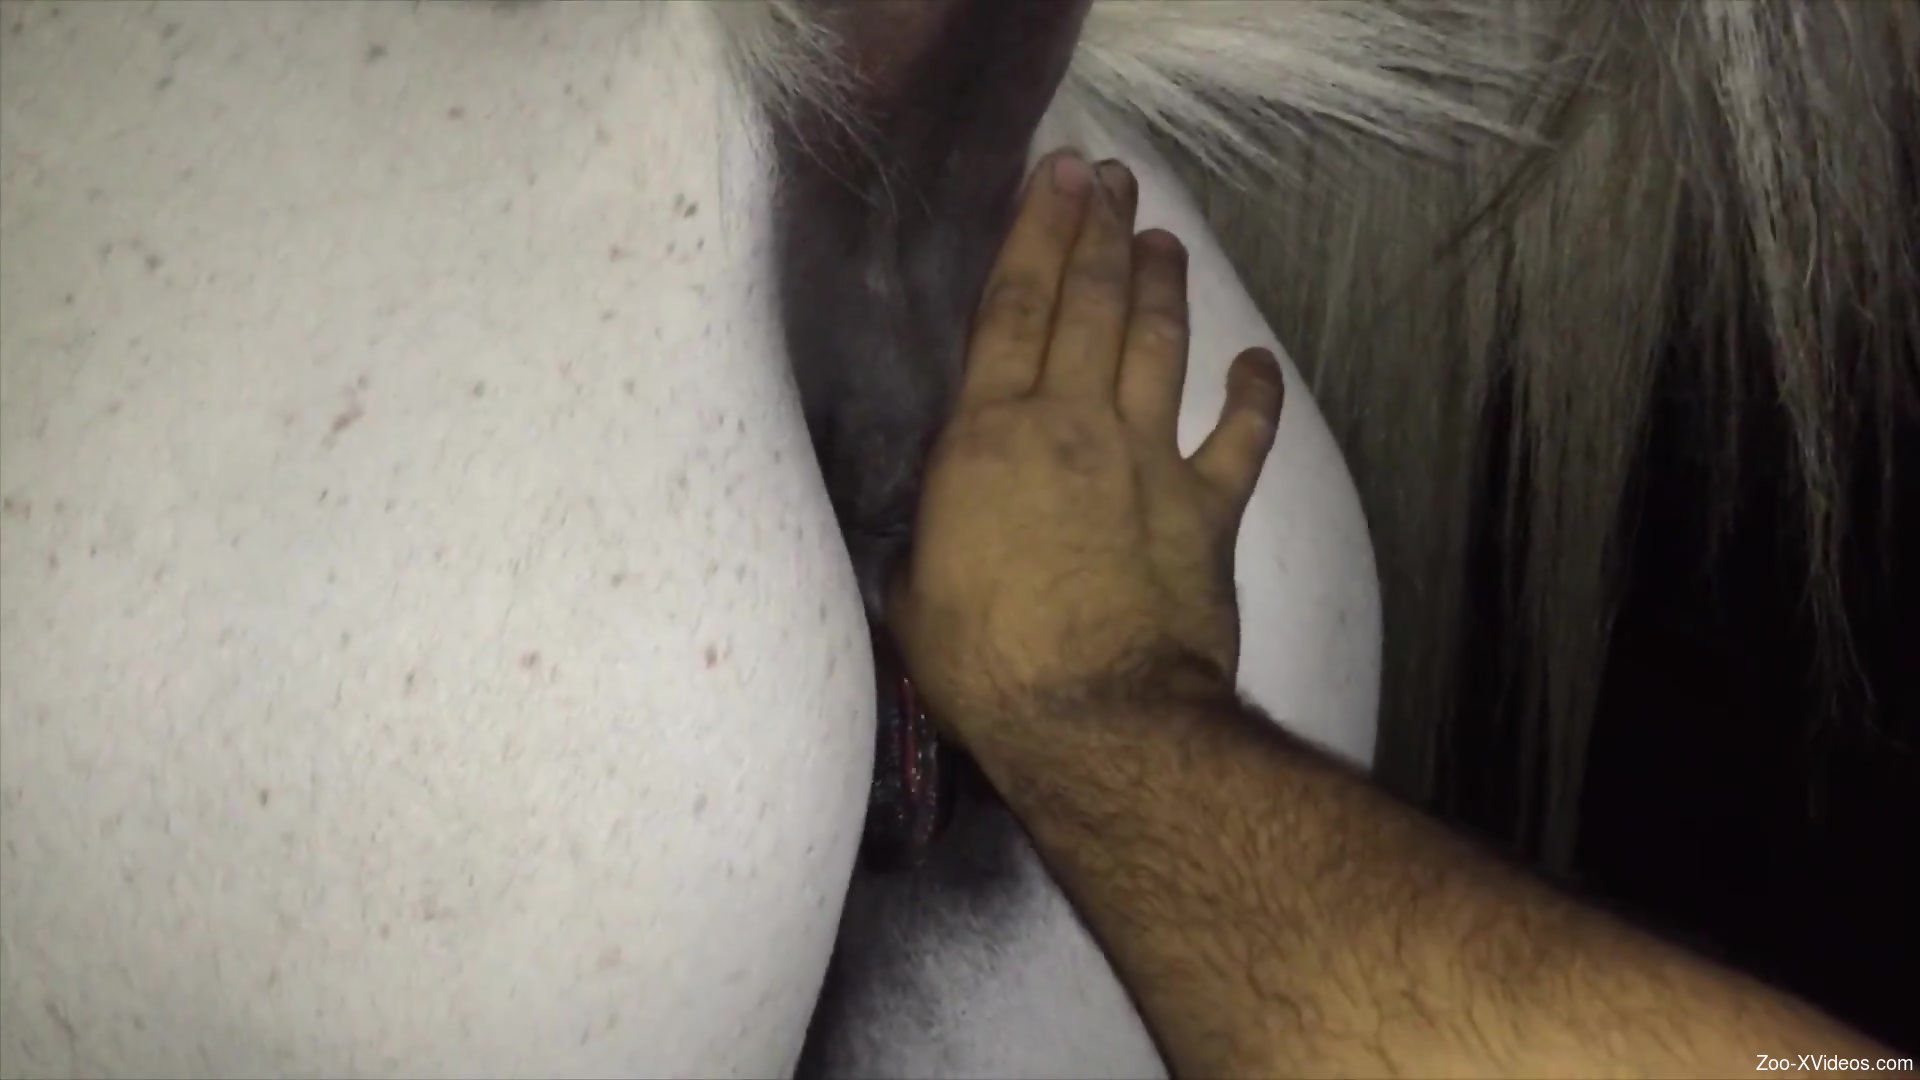 Horse And Mare Xxx - Man finger fucks horse's wet vagina in advance to fucking it